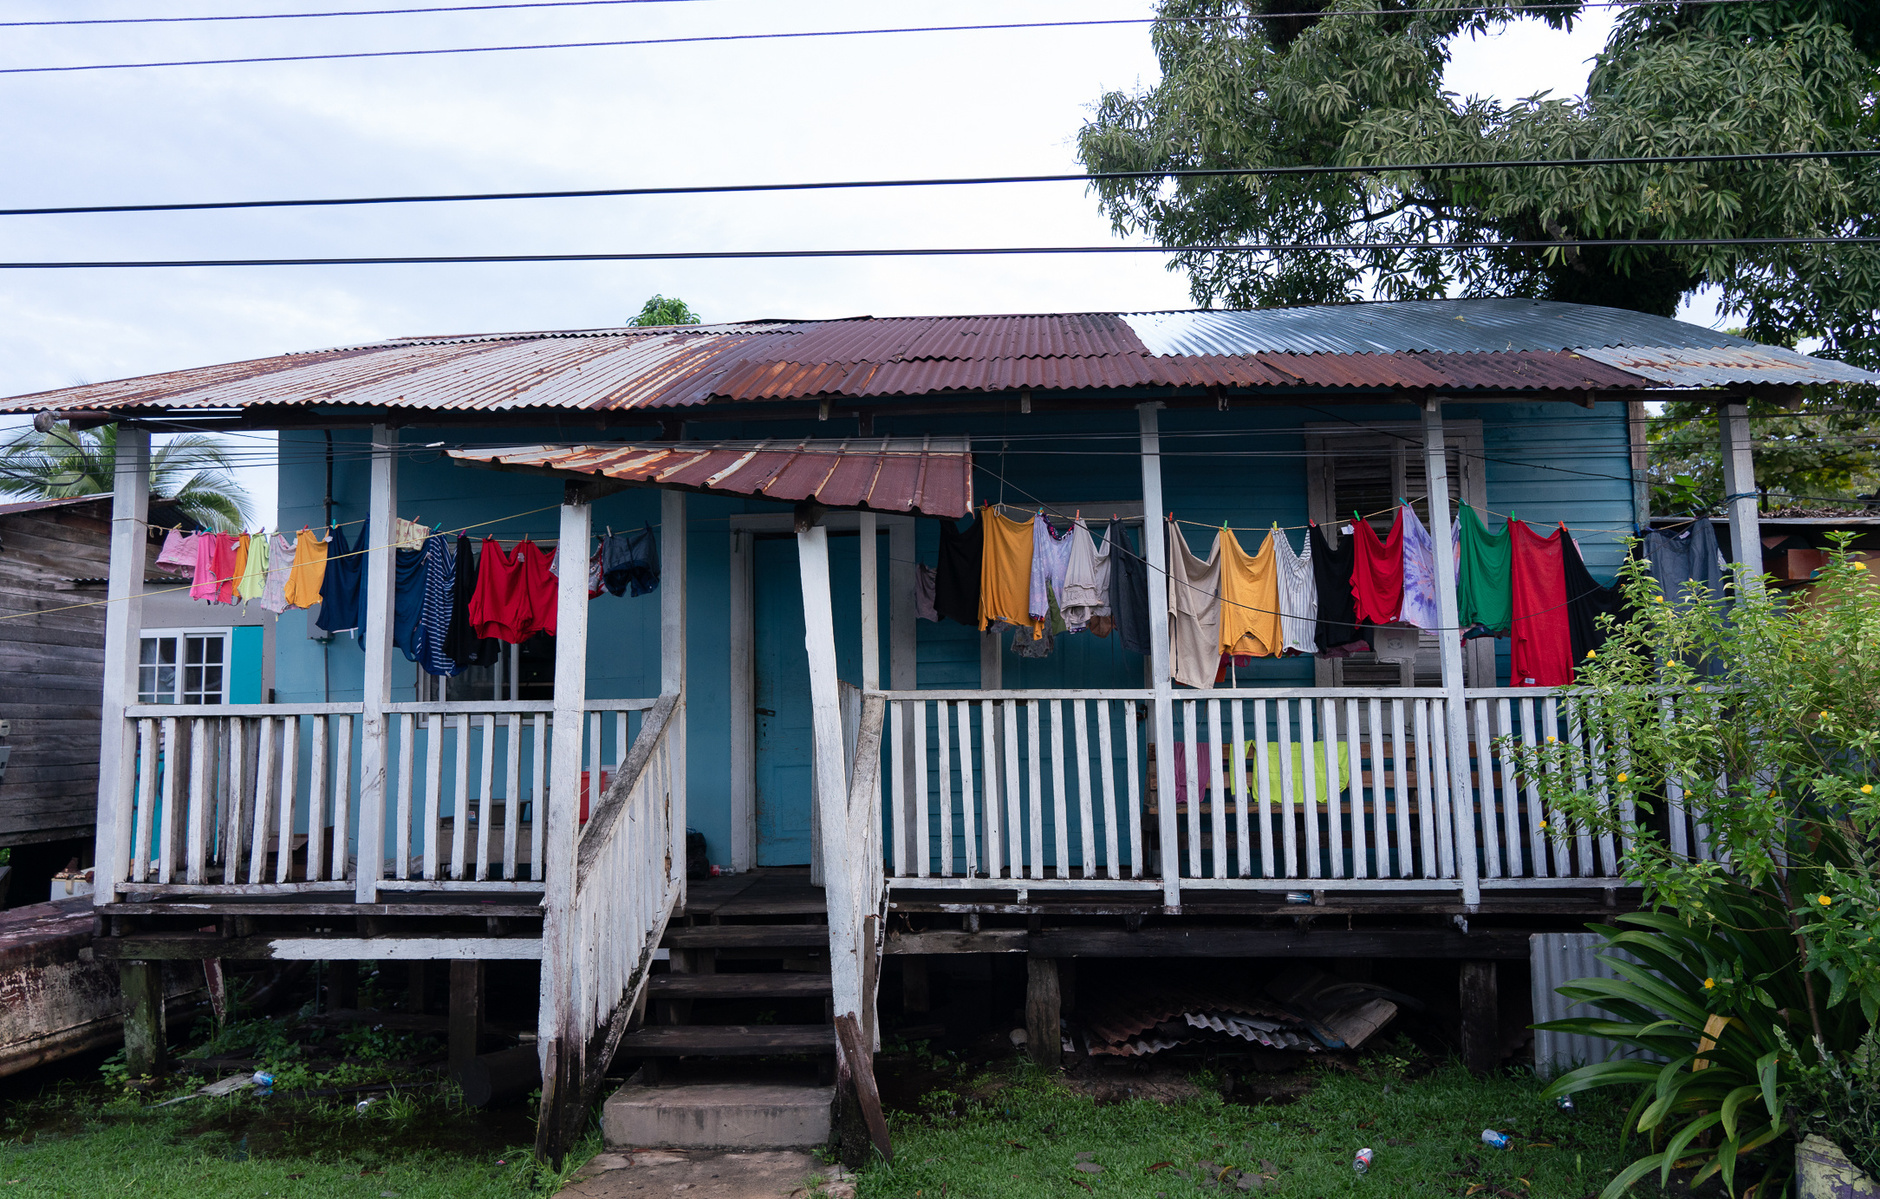 Caribbean Homes with colorful laundry